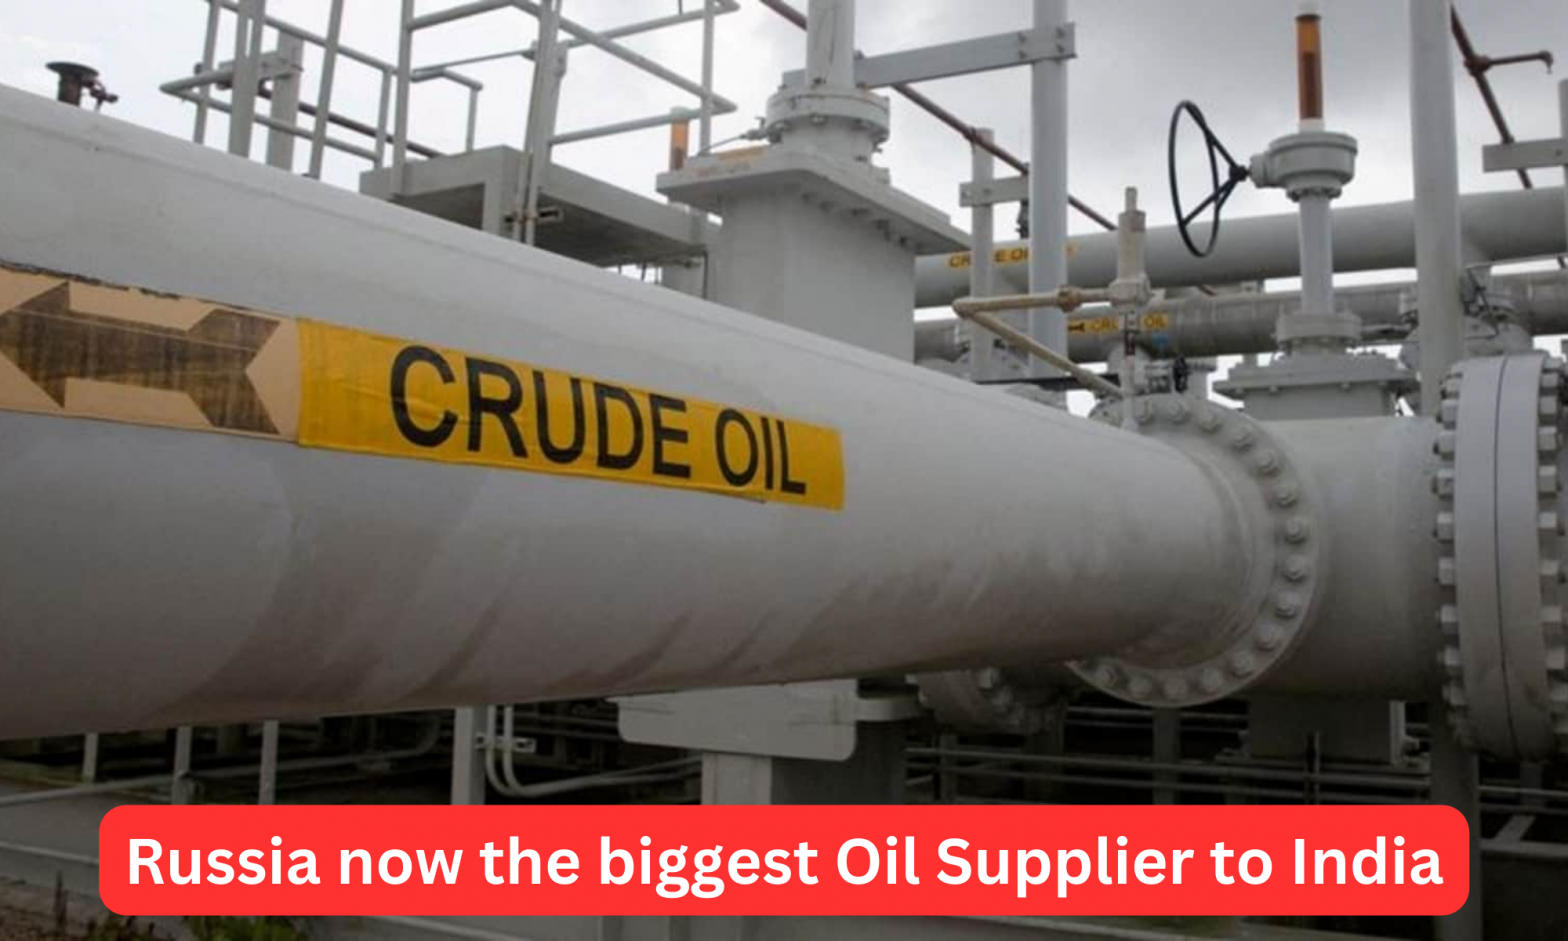 Russia now the biggest Oil Supplier to India